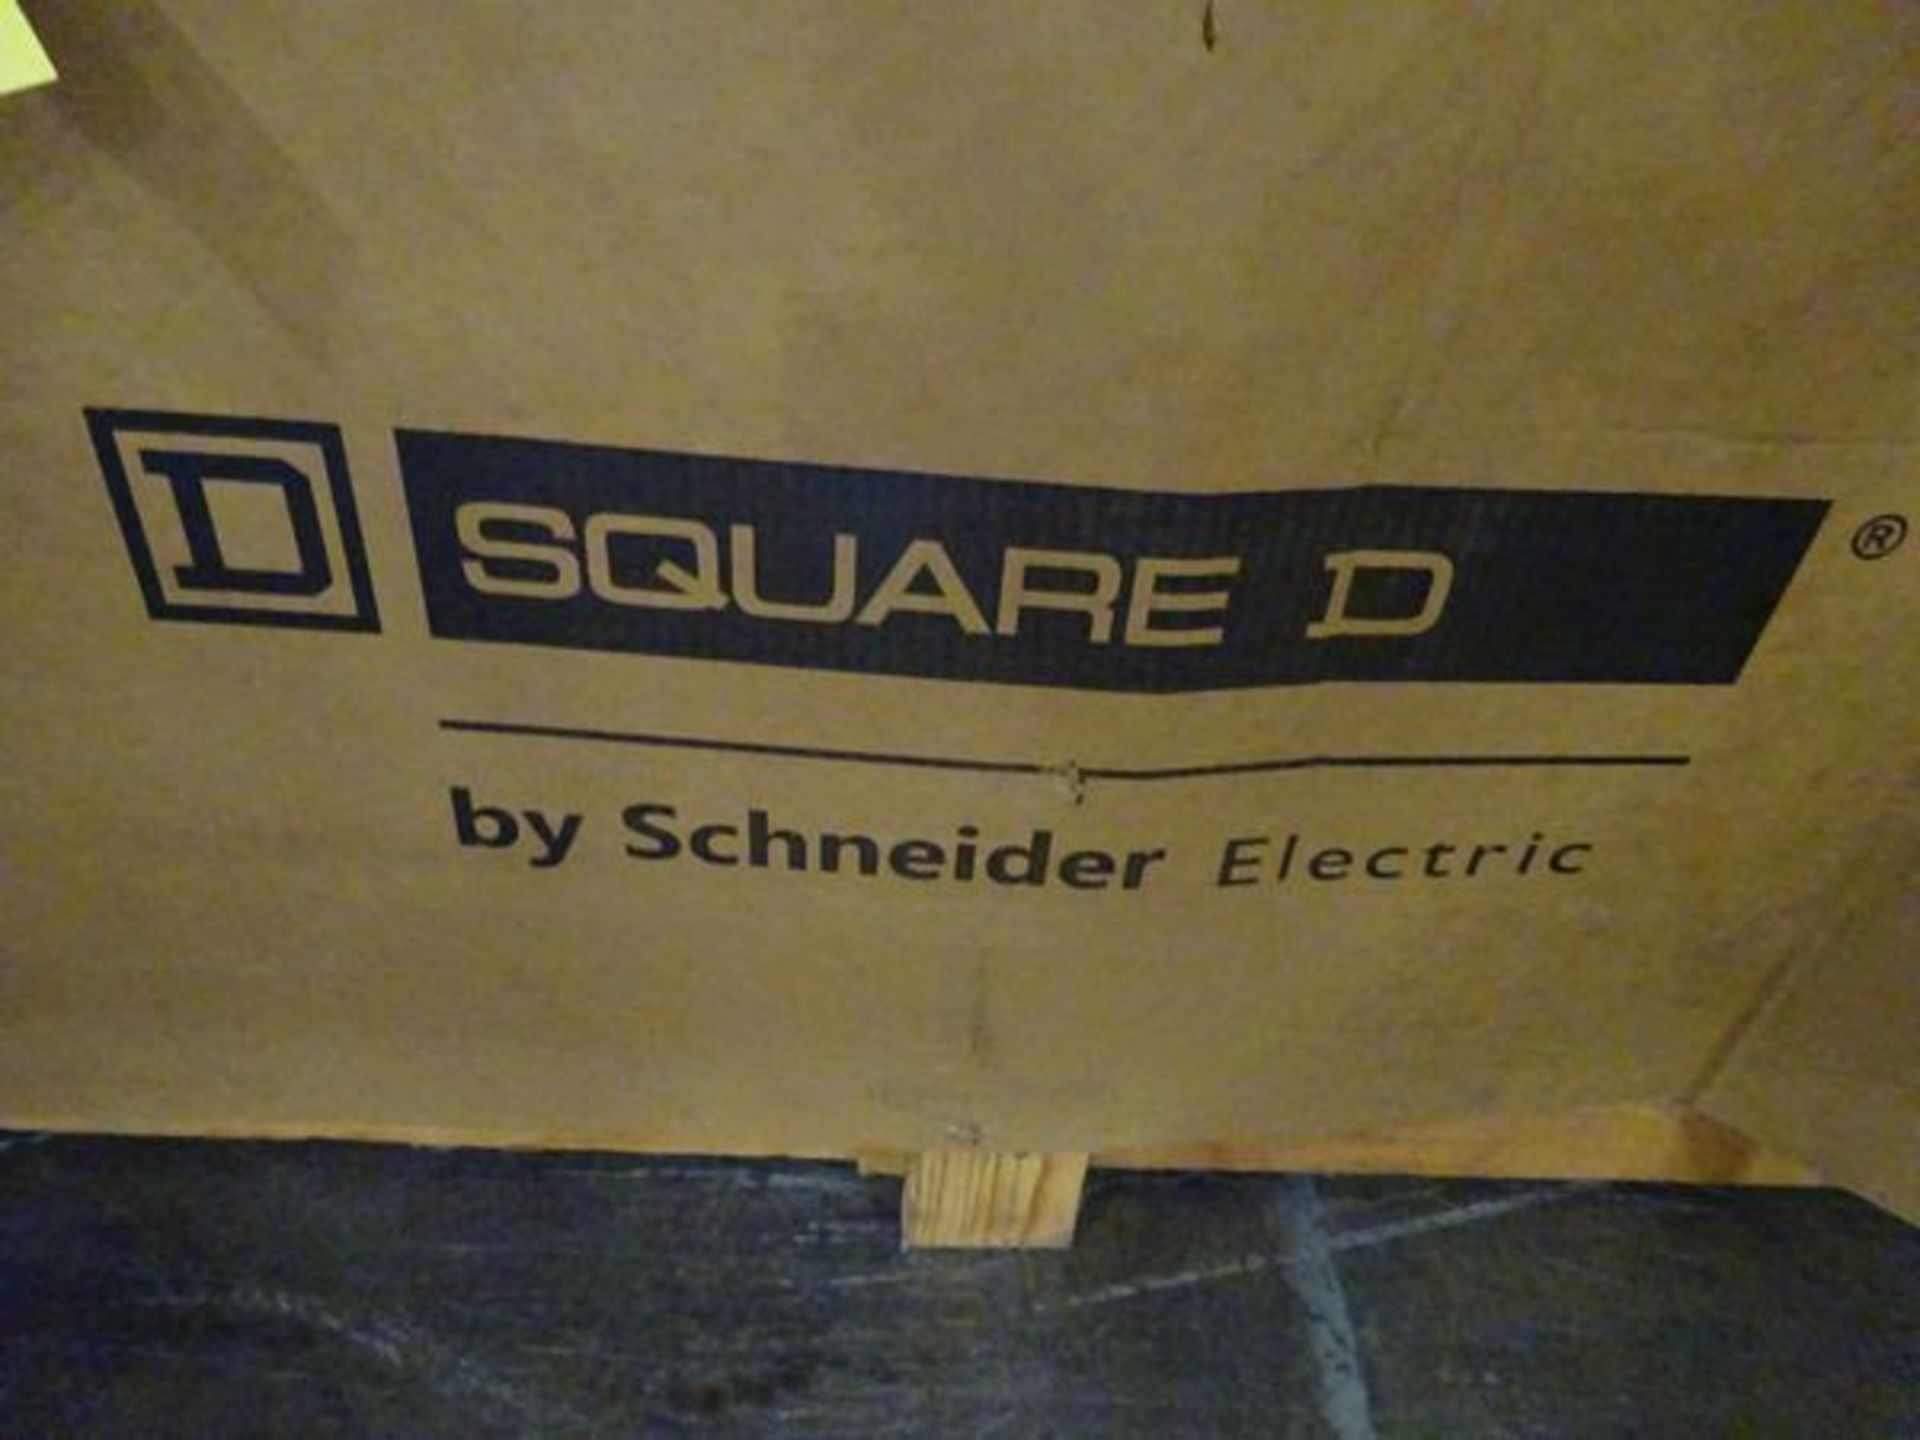 Schneider Square D E Flex adjustable speed drive controller, new and still in original crate - Image 3 of 5